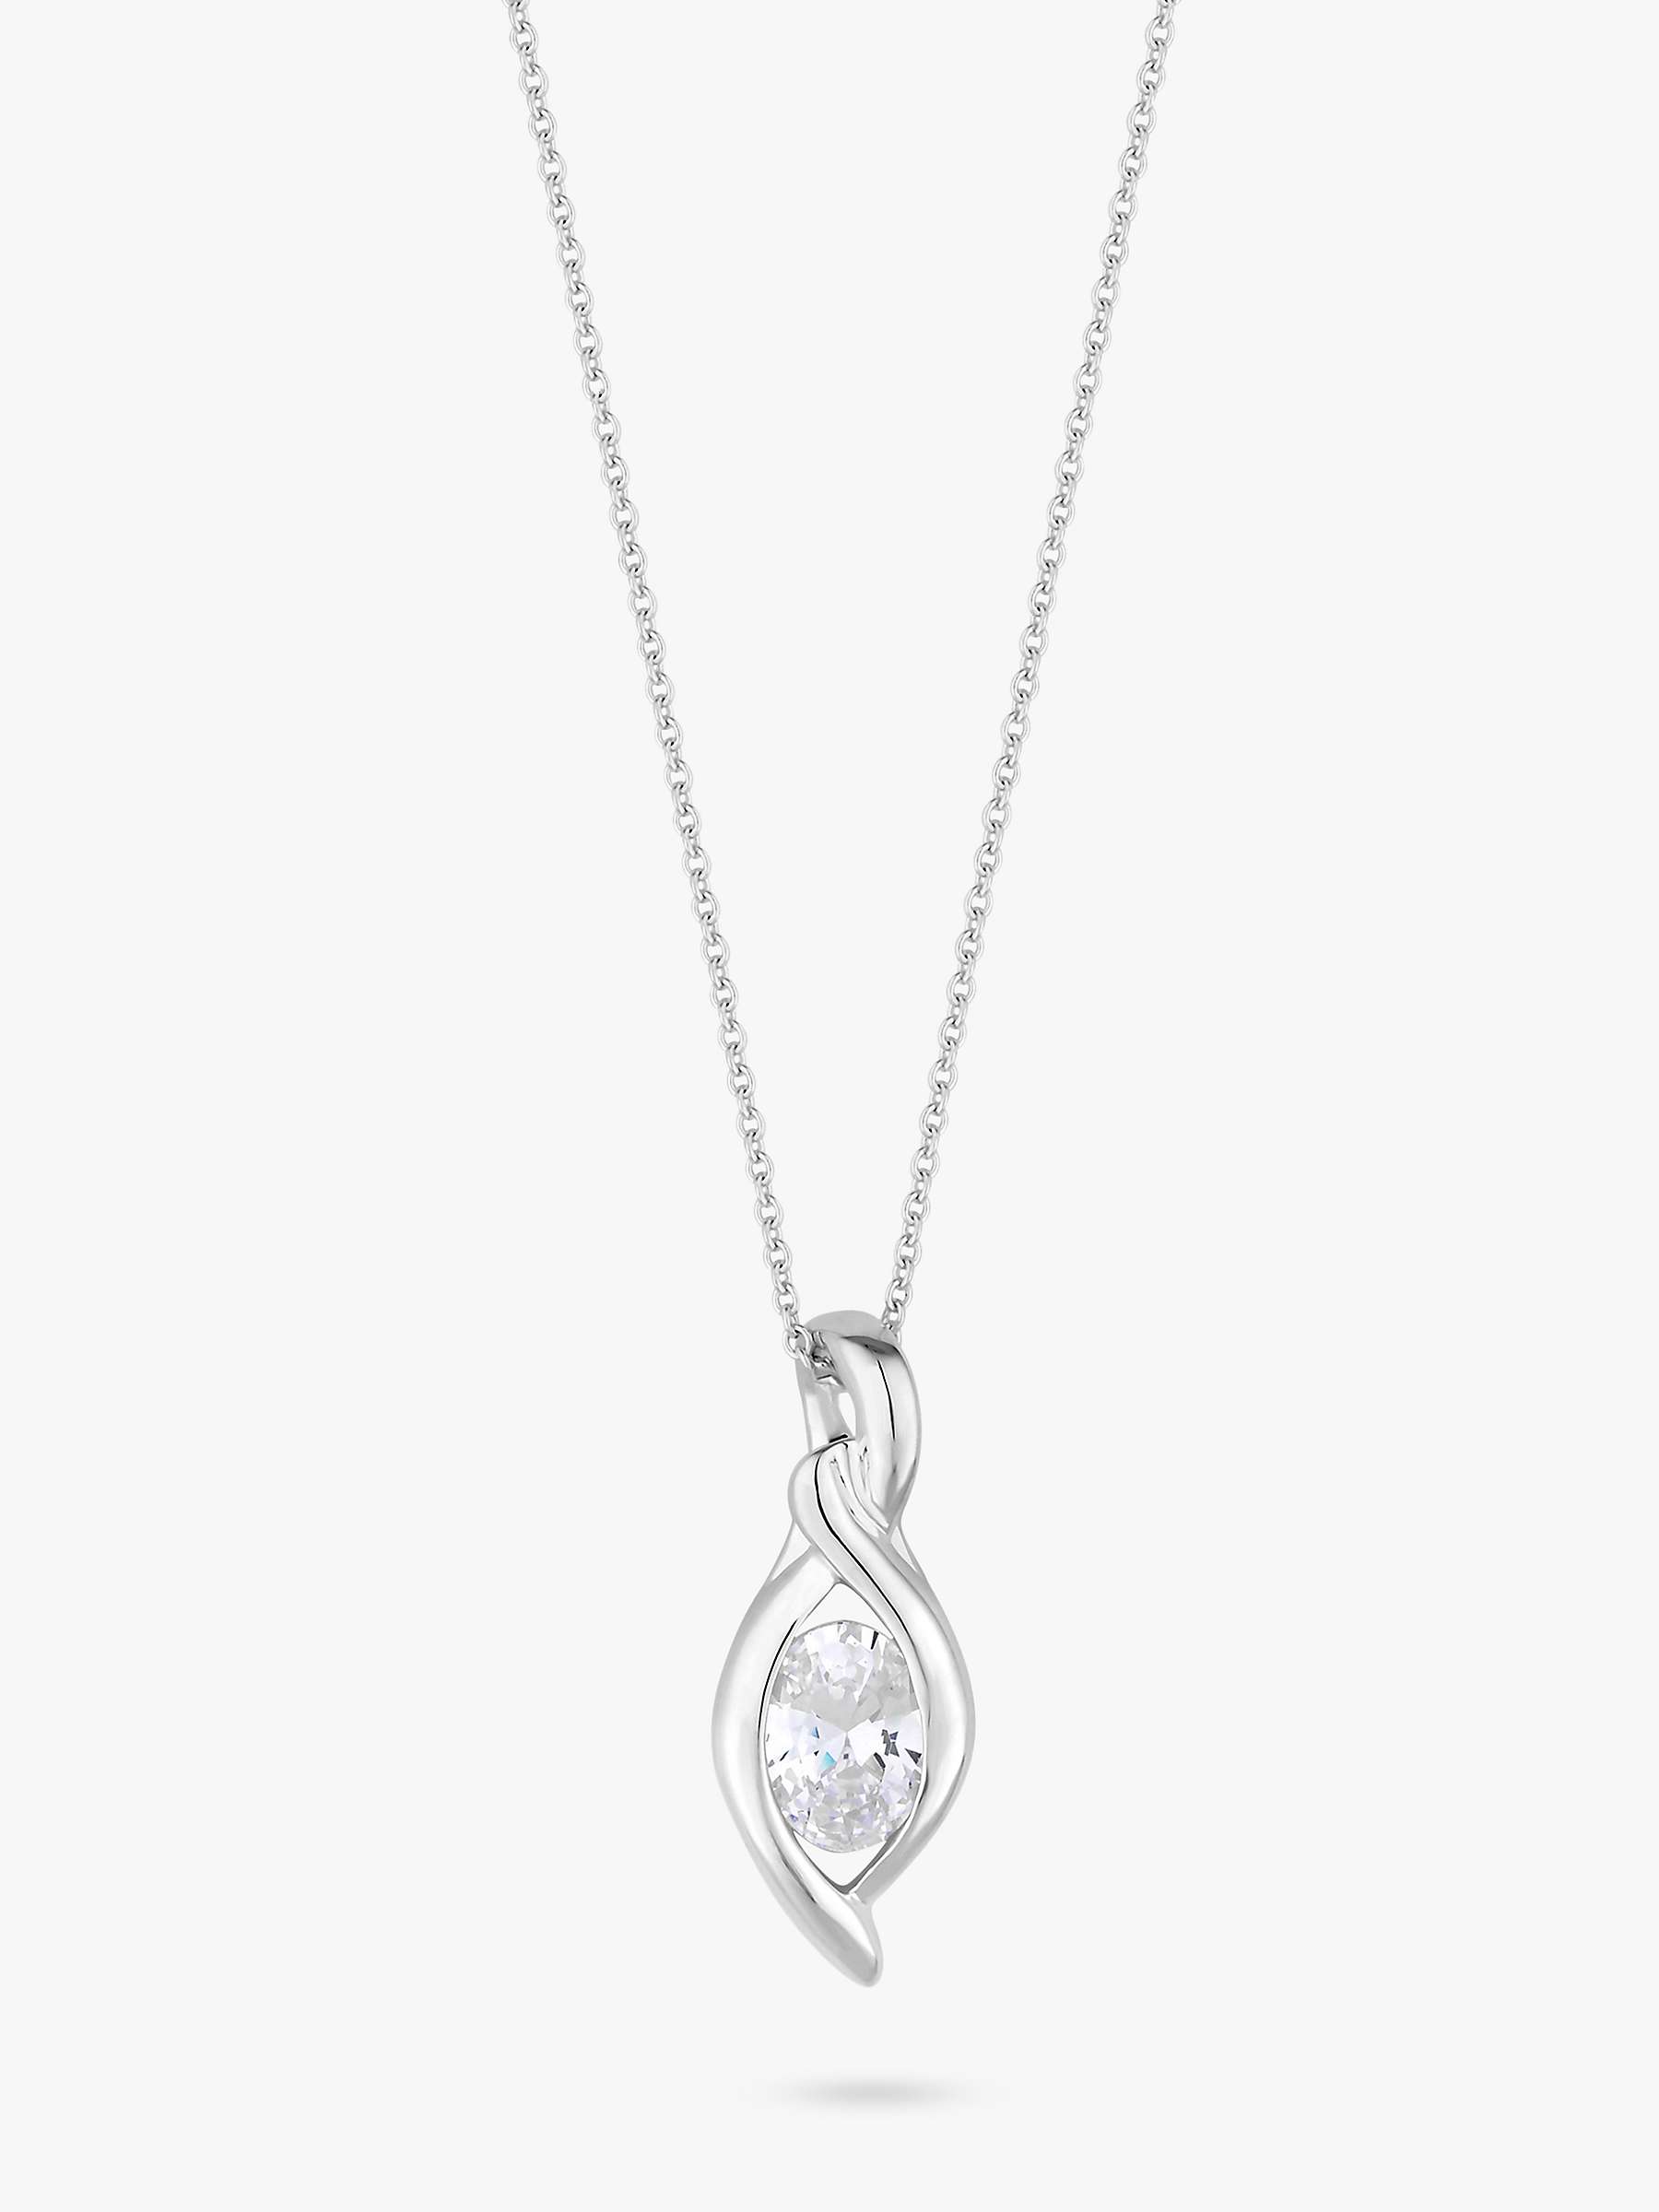 Buy Simply Silver Cubic Zirconia Navette Pendant Necklace, Silver Online at johnlewis.com